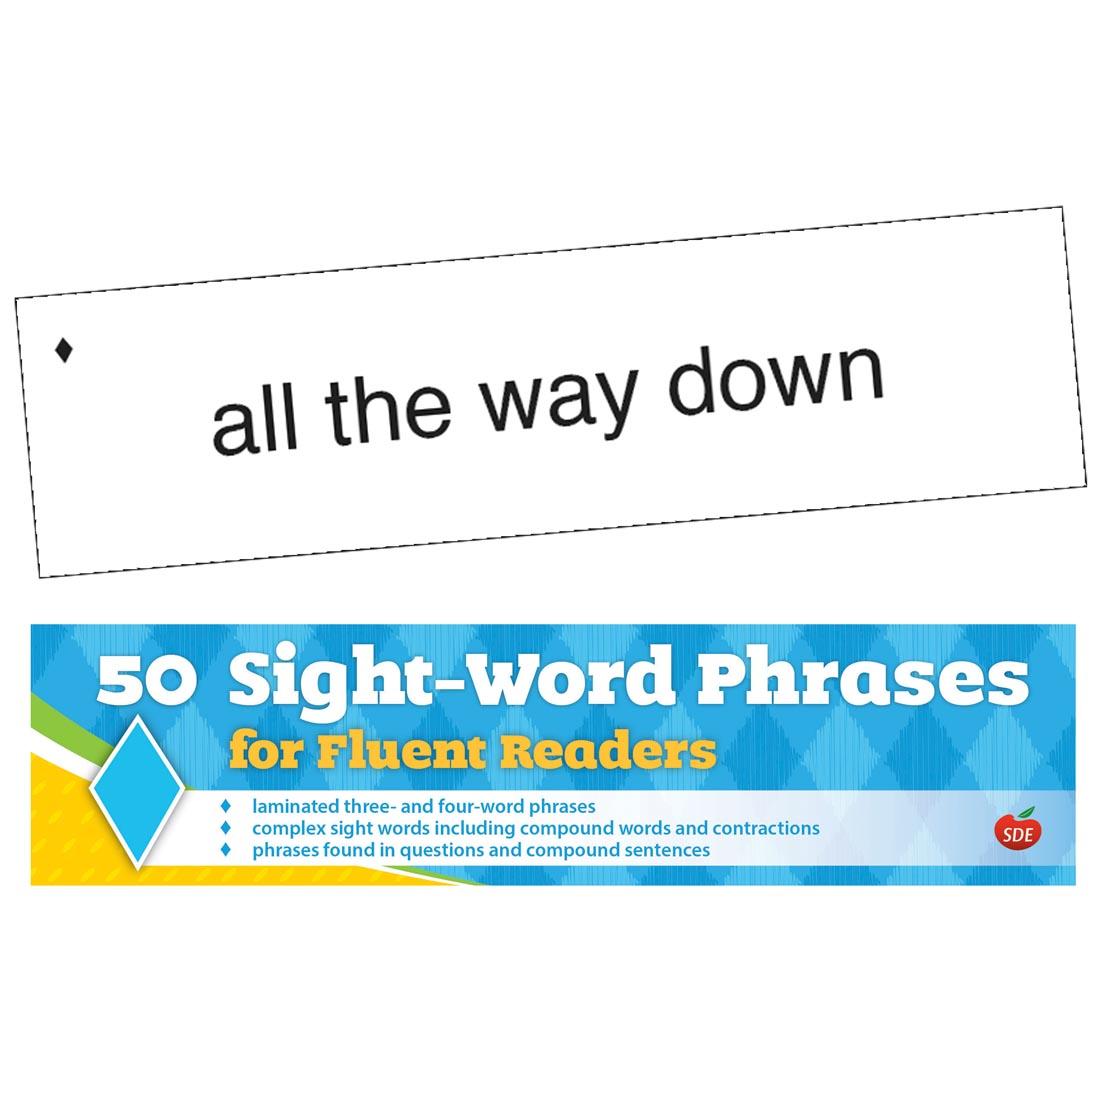 50 Sight-Word Phrases Cards for Fluent Readers; sample card with the text "all the way down"